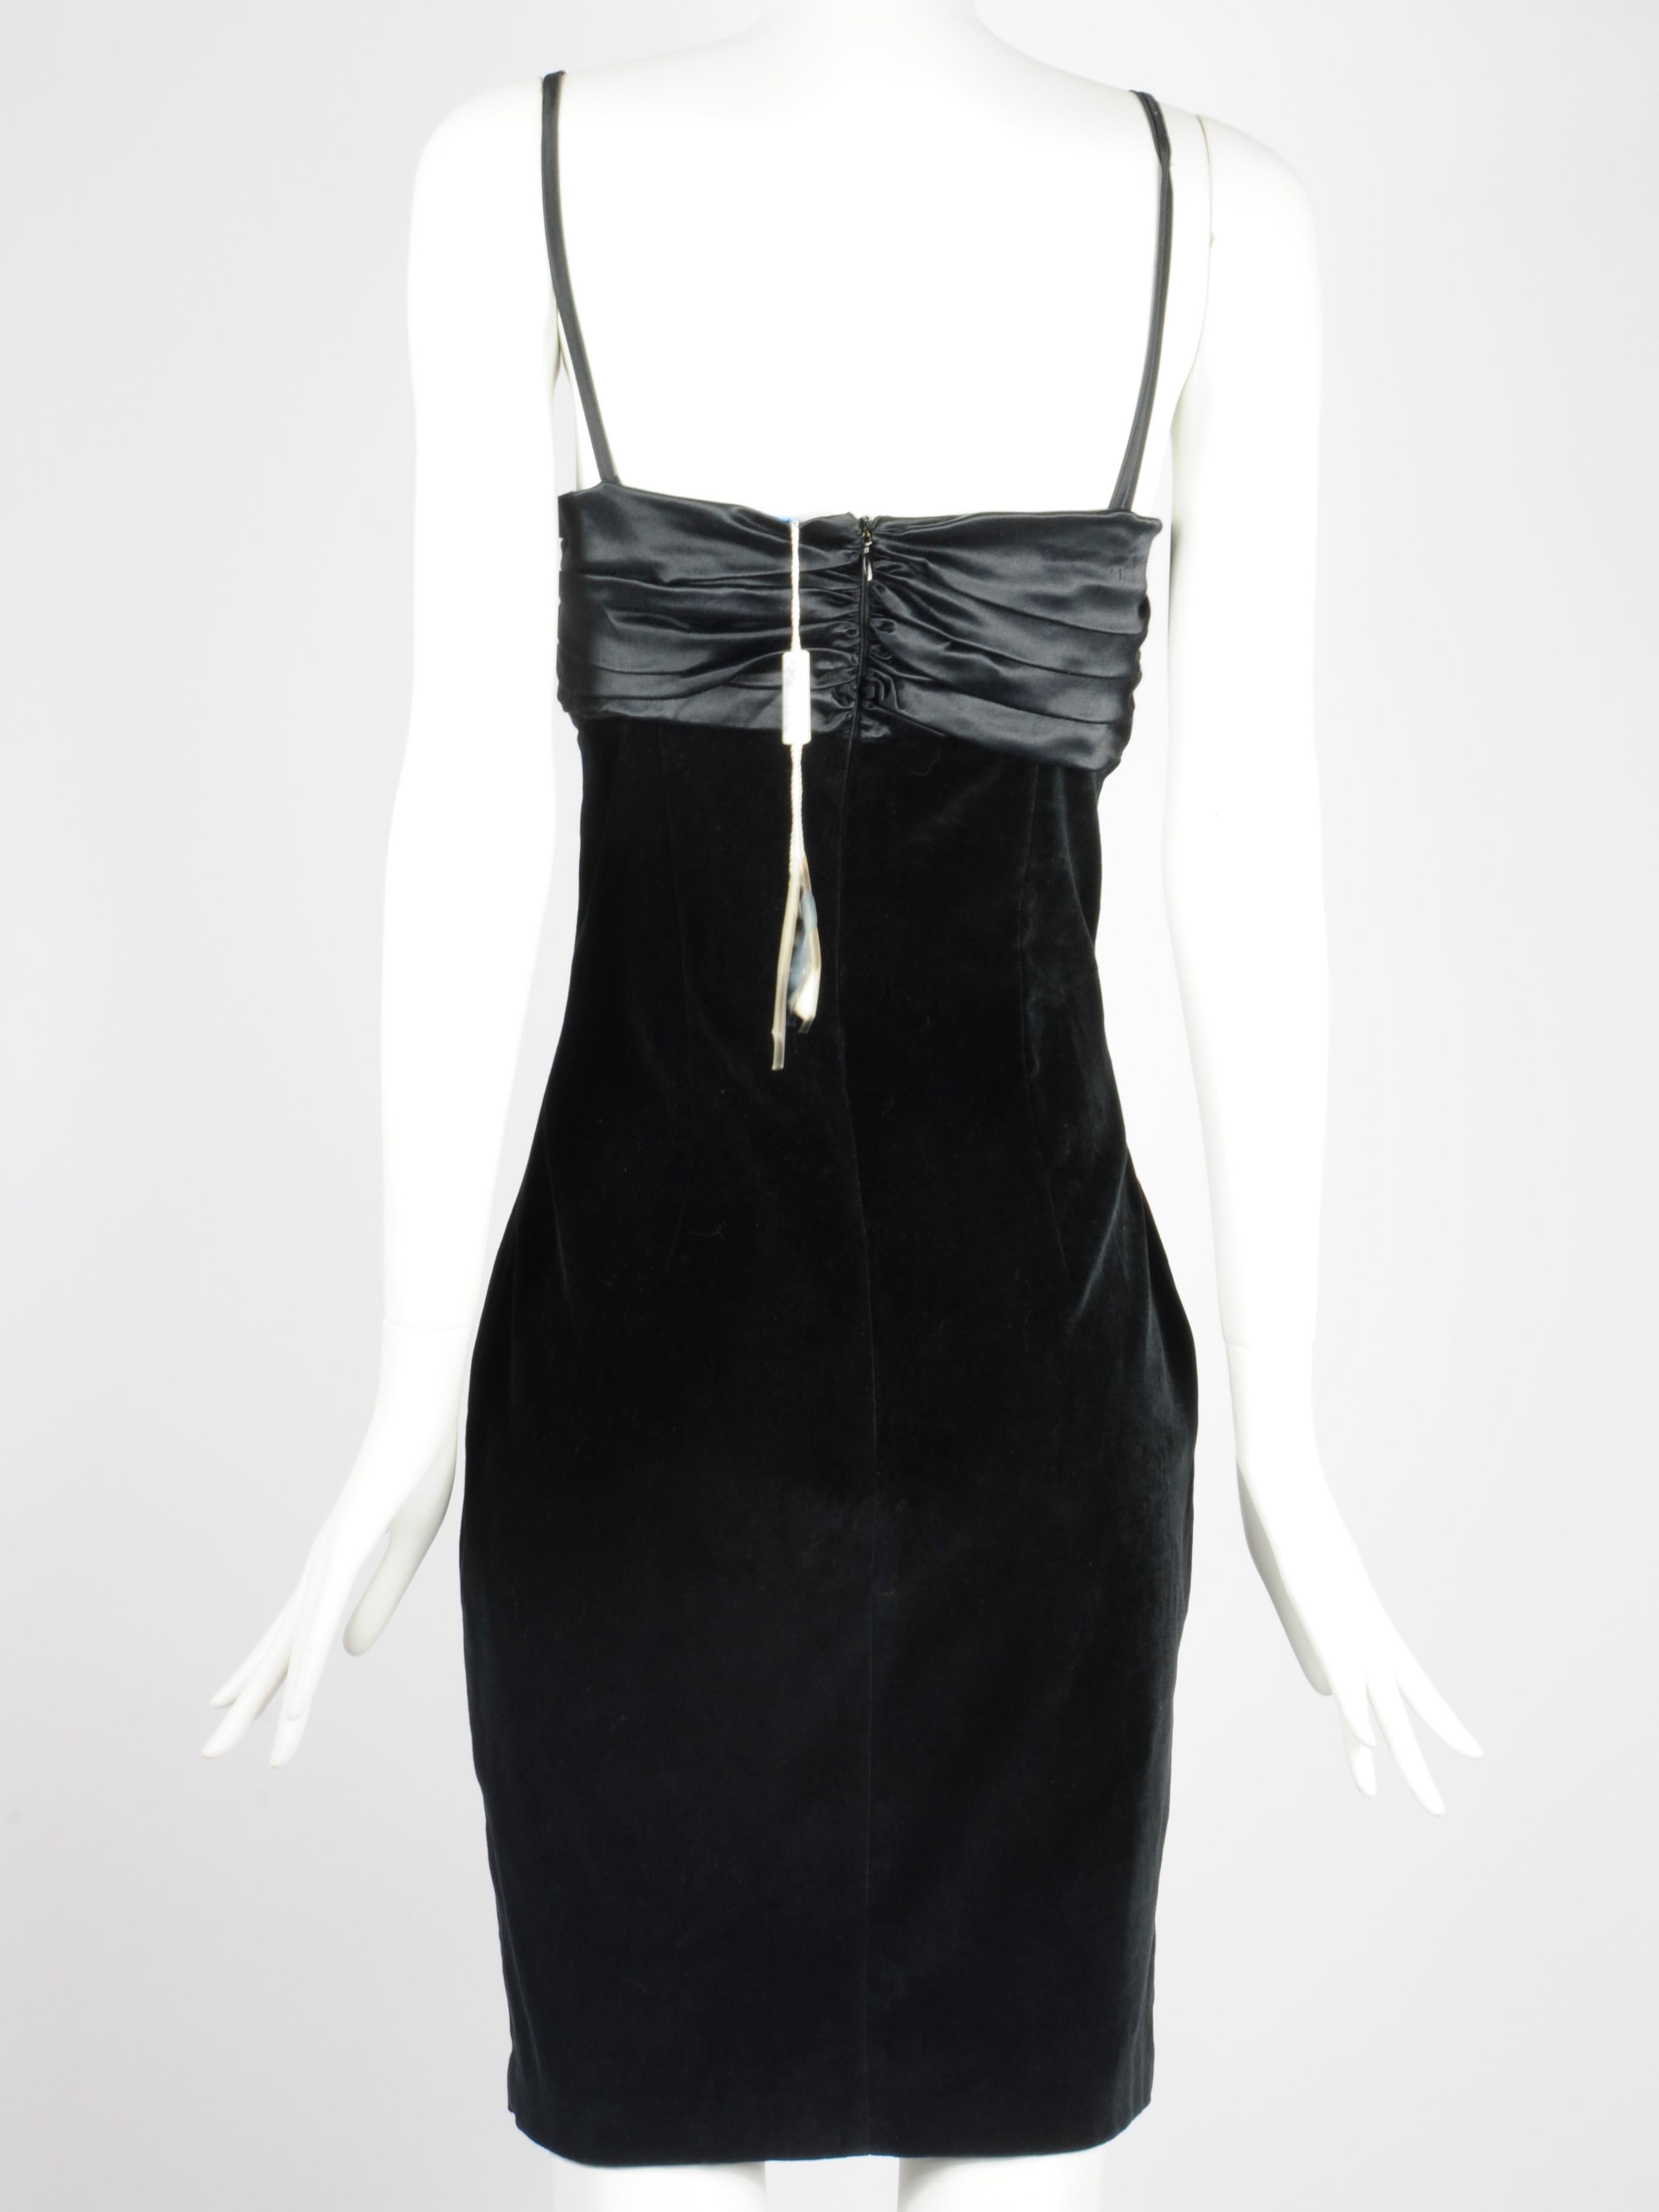 Blumarine Folies Satin and Velvet Cocktail Dress Ruched Top Glitter Detail 1990s For Sale 3